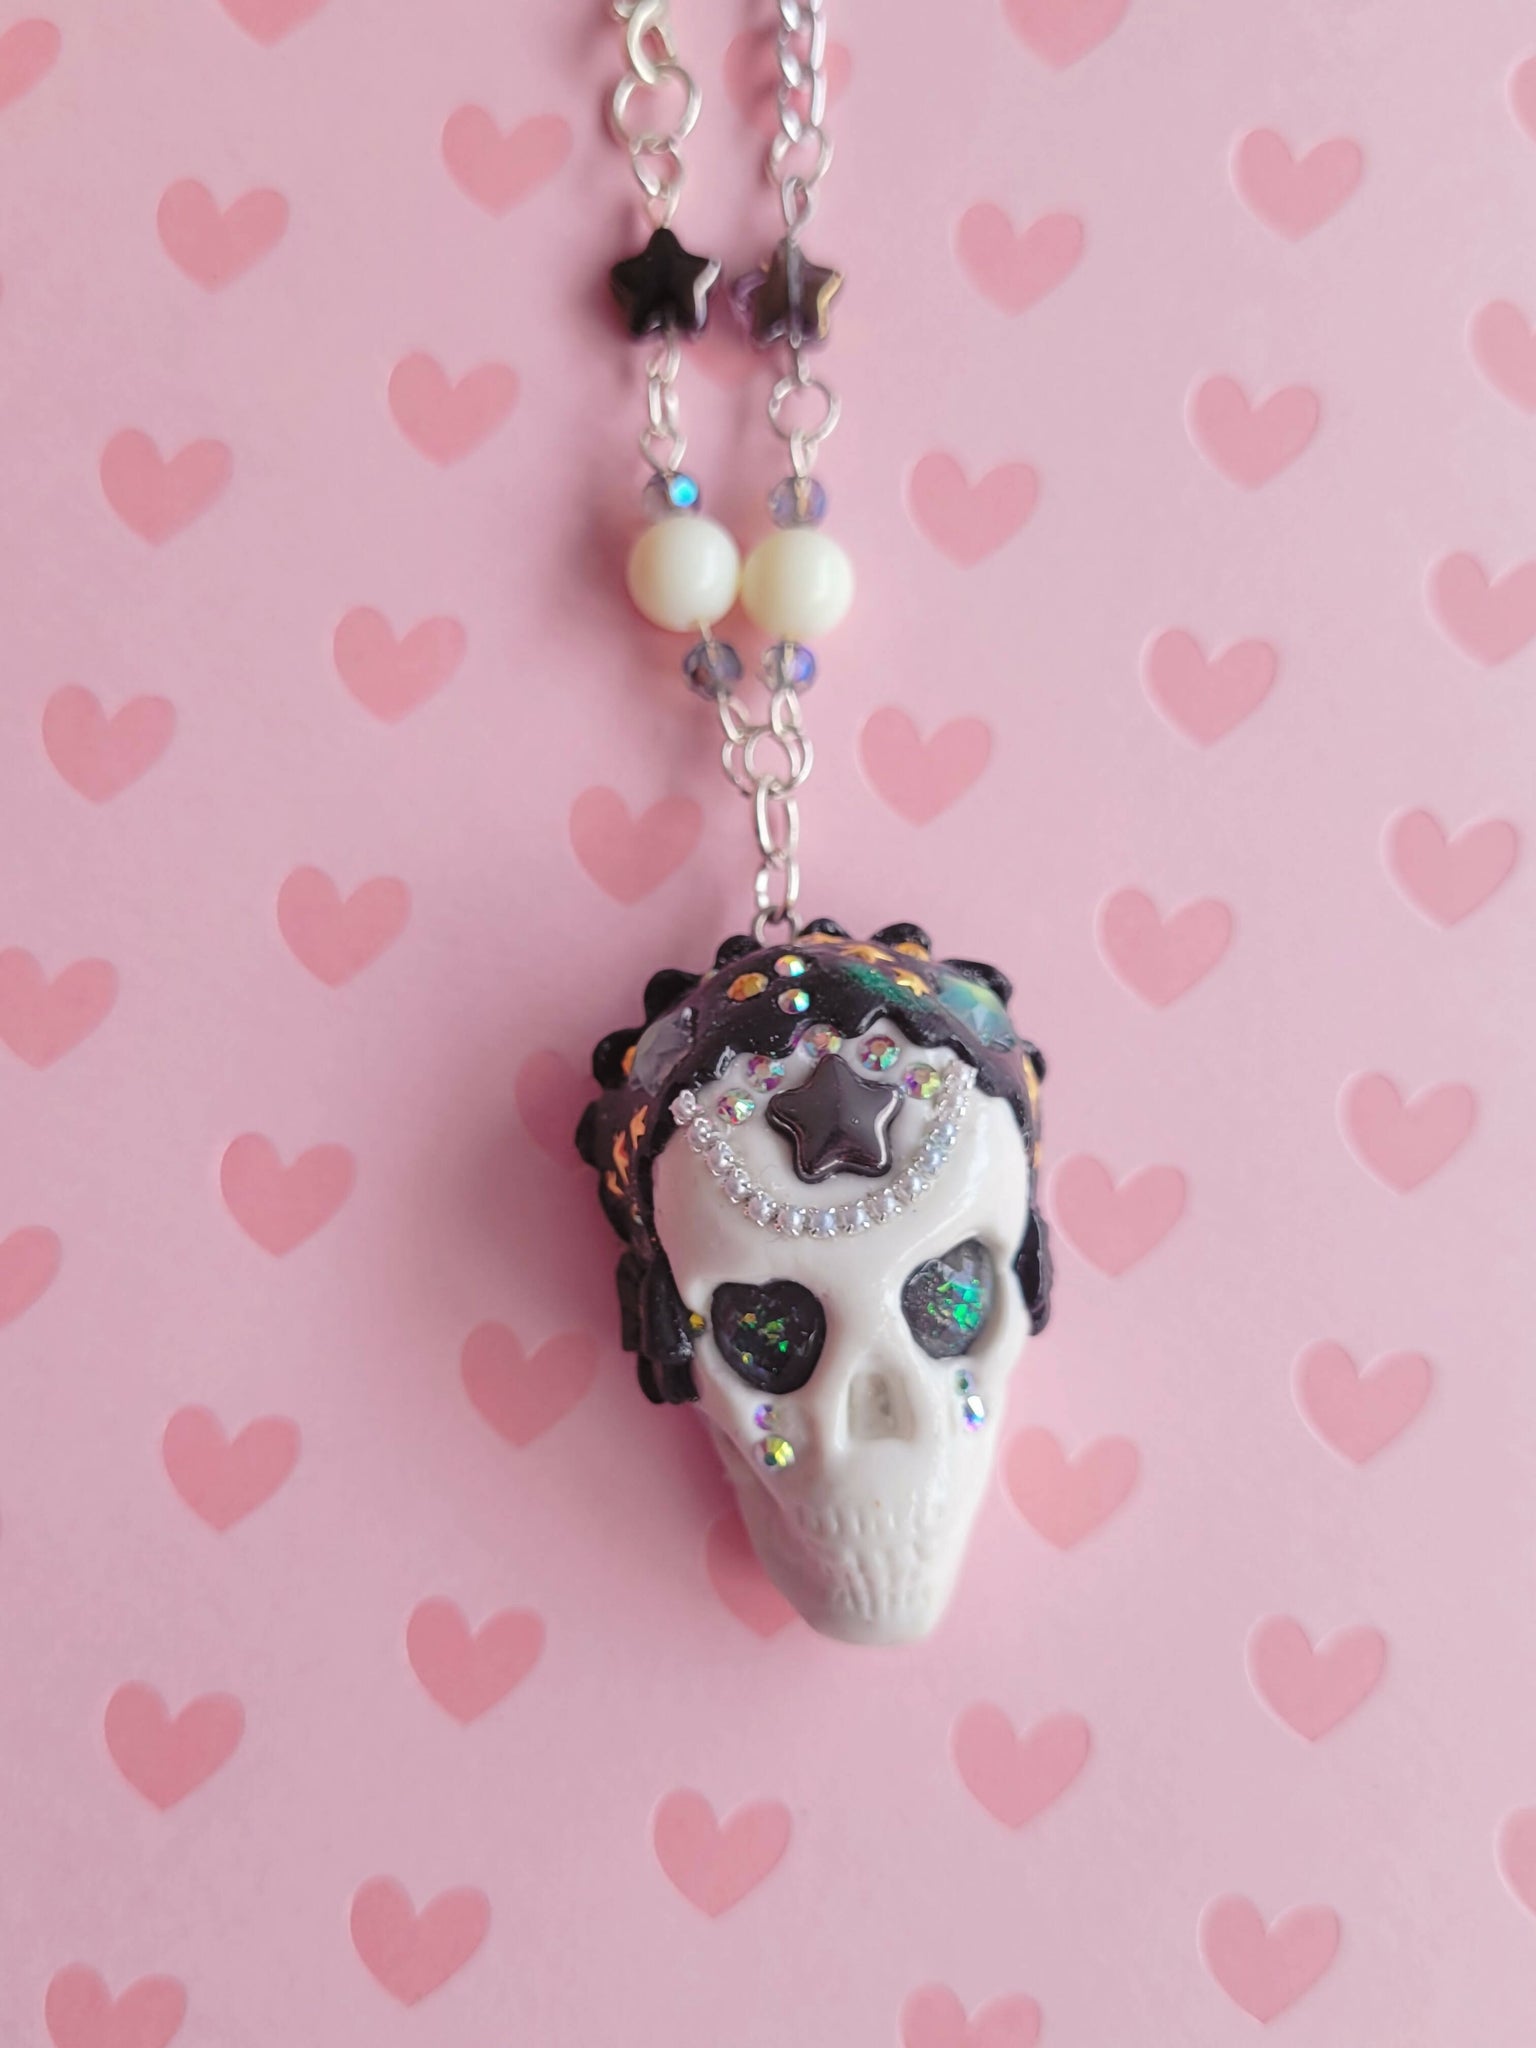 Fancy Candy Skull Necklace